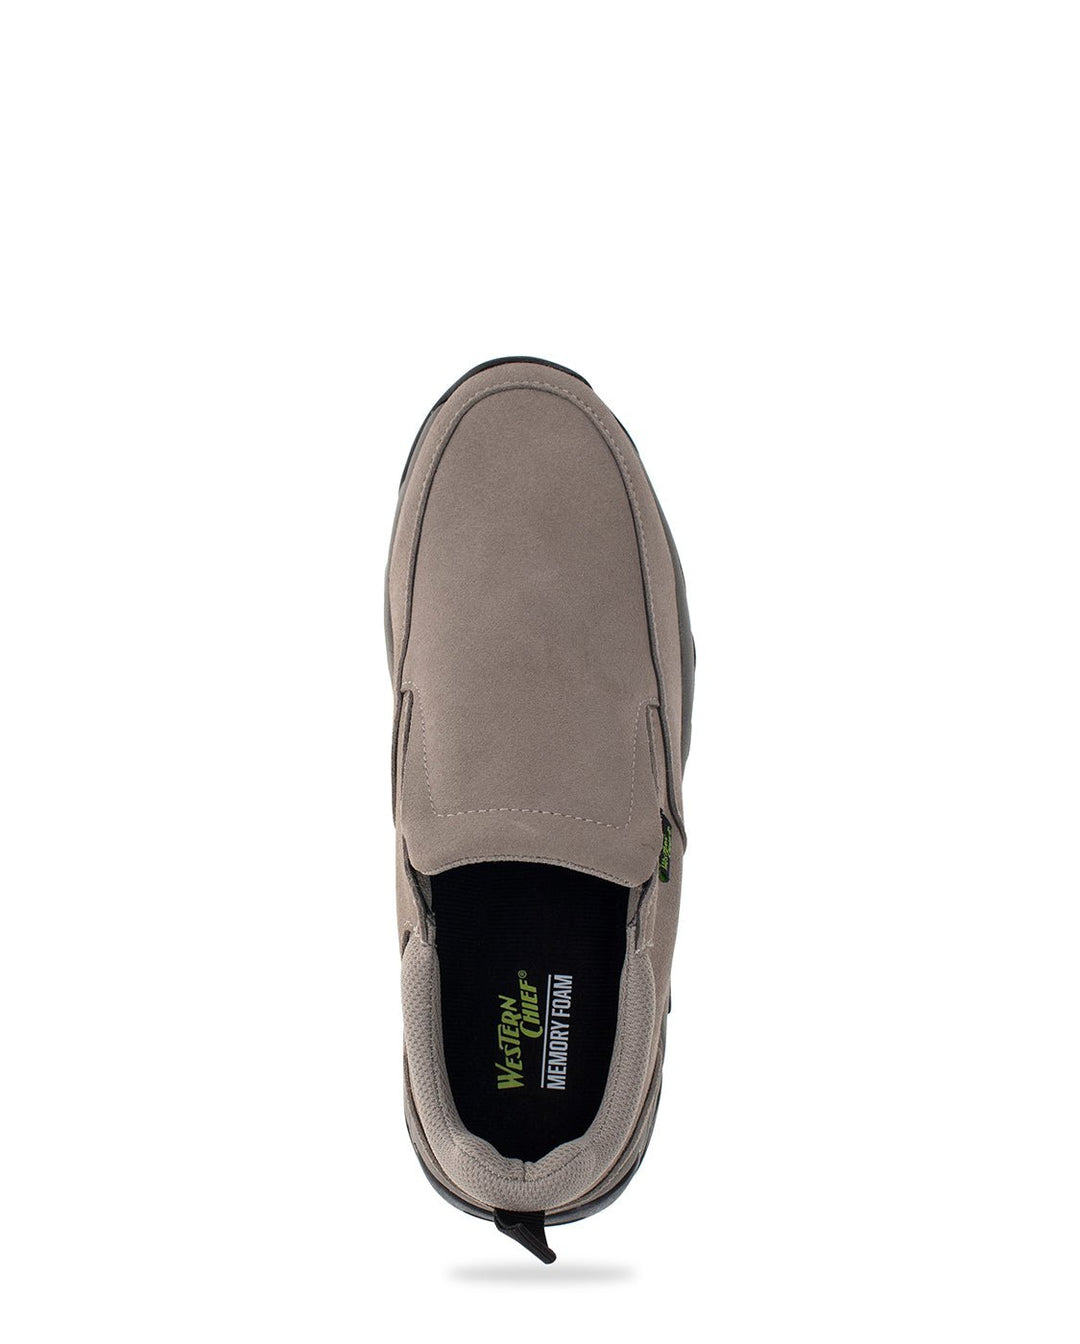 Men's Townsend Slip On - Taupe - Western Chief